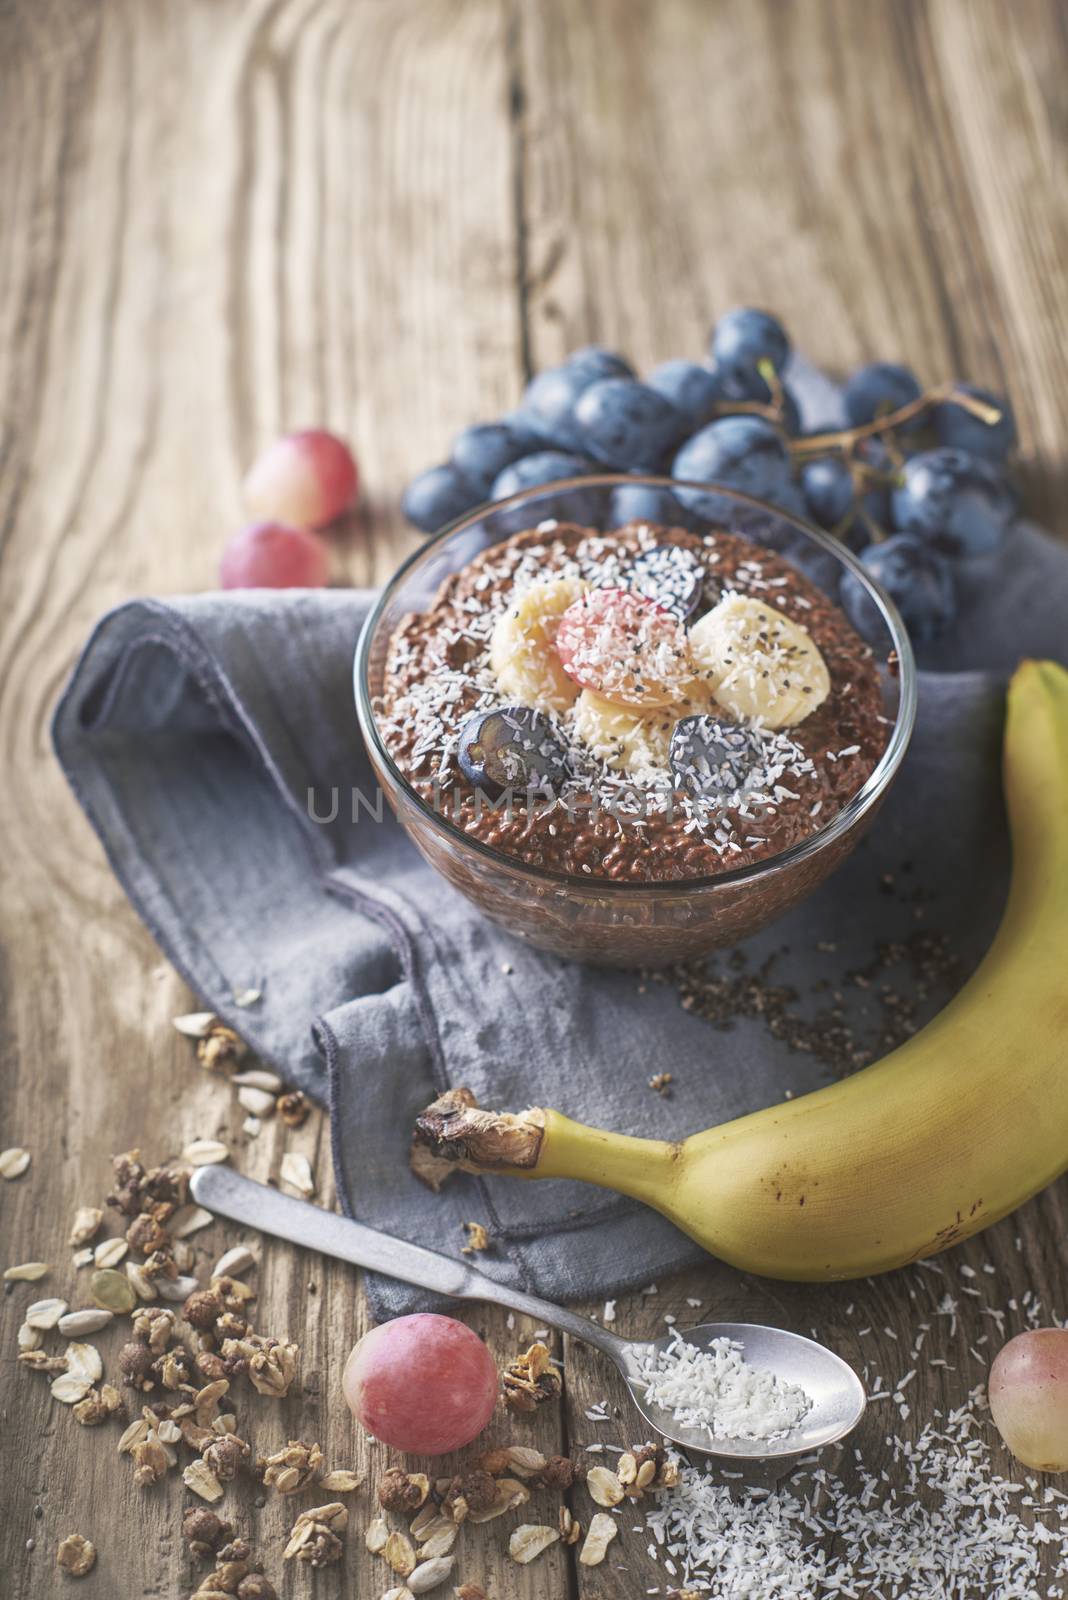 Chocolate chia pudding with fruit in the glass bowl vertical by Deniskarpenkov